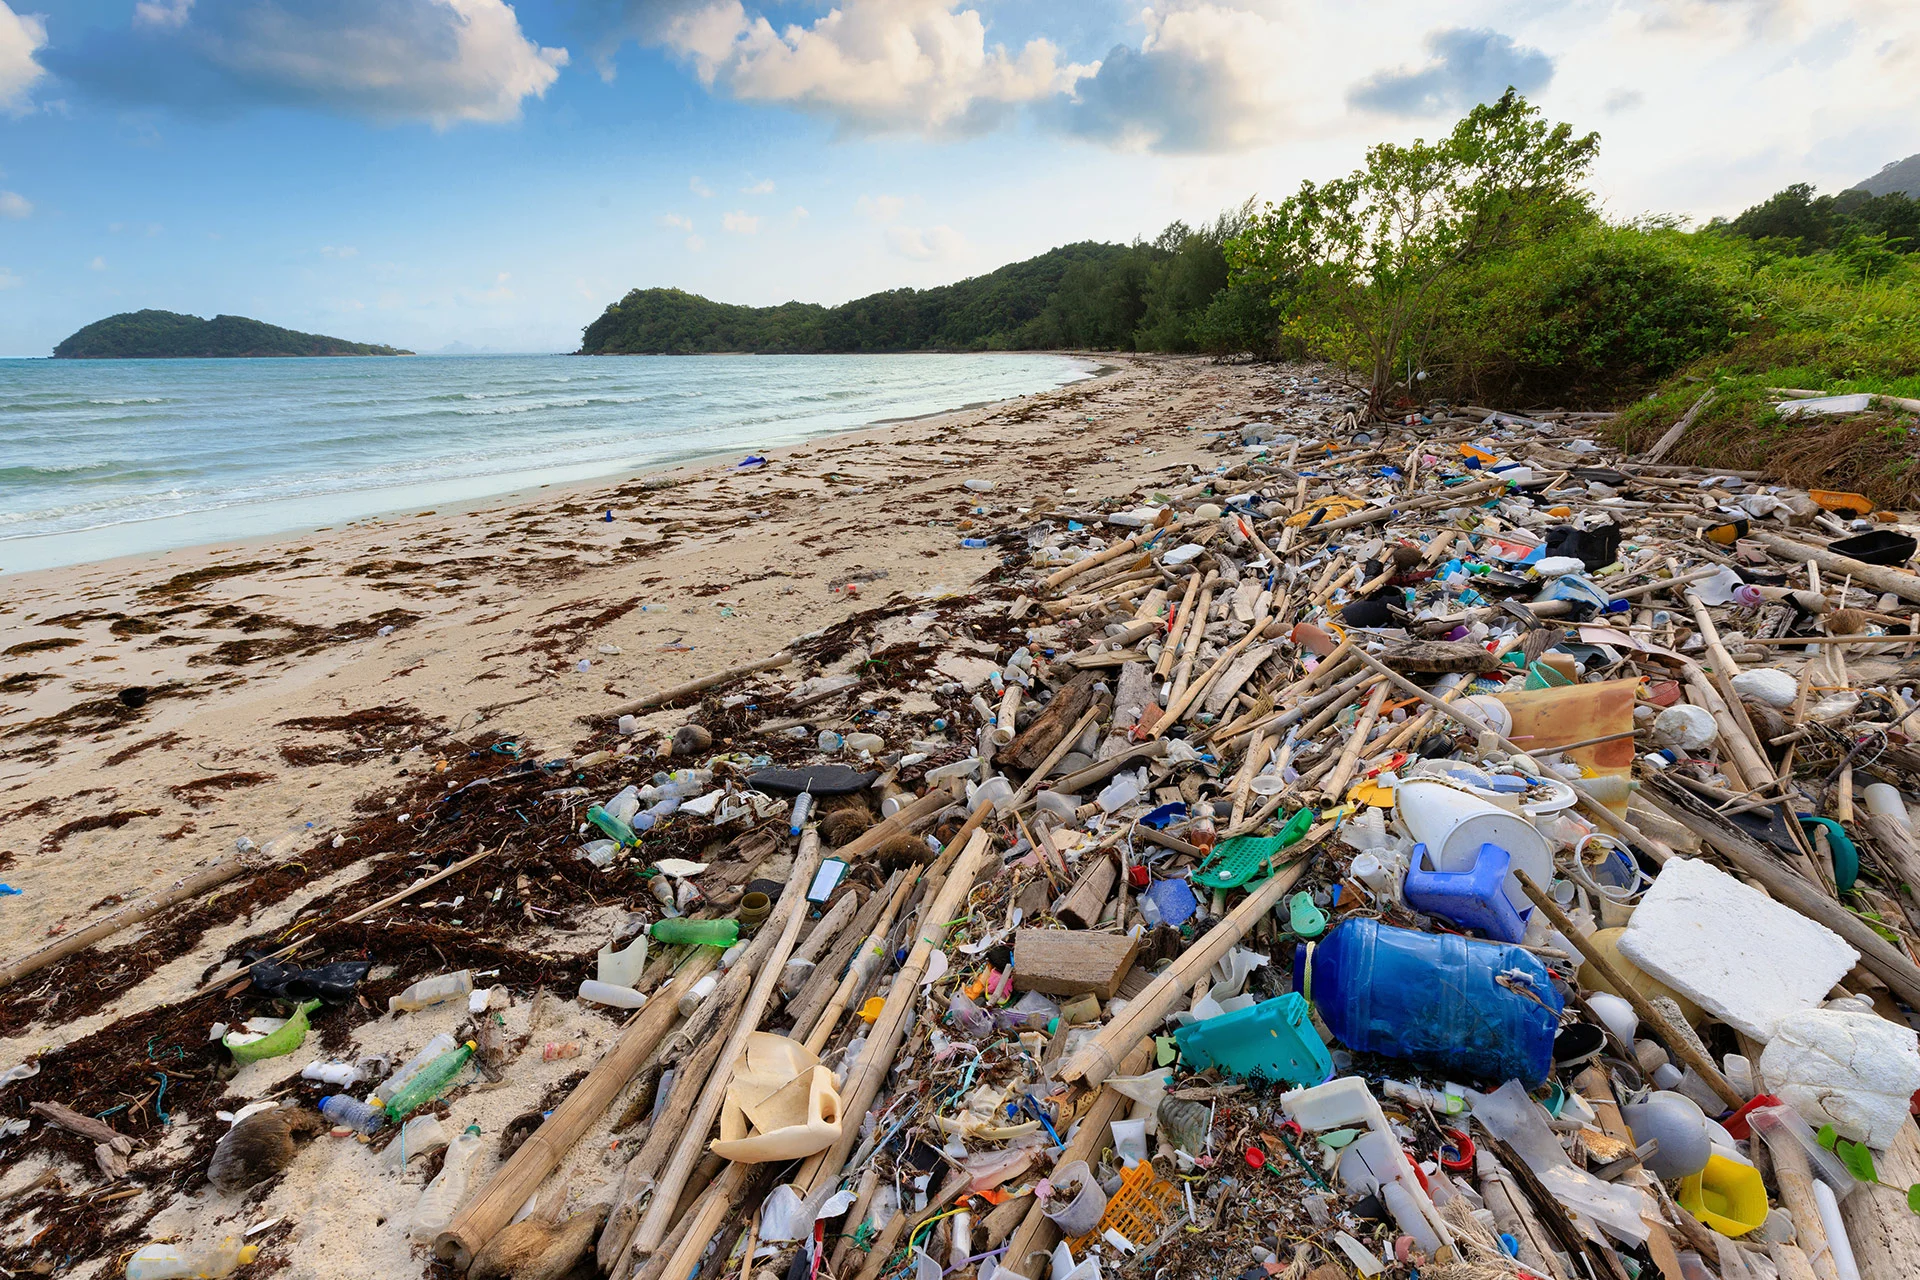 Plastic pollution dumped into oceans will triple by 2040